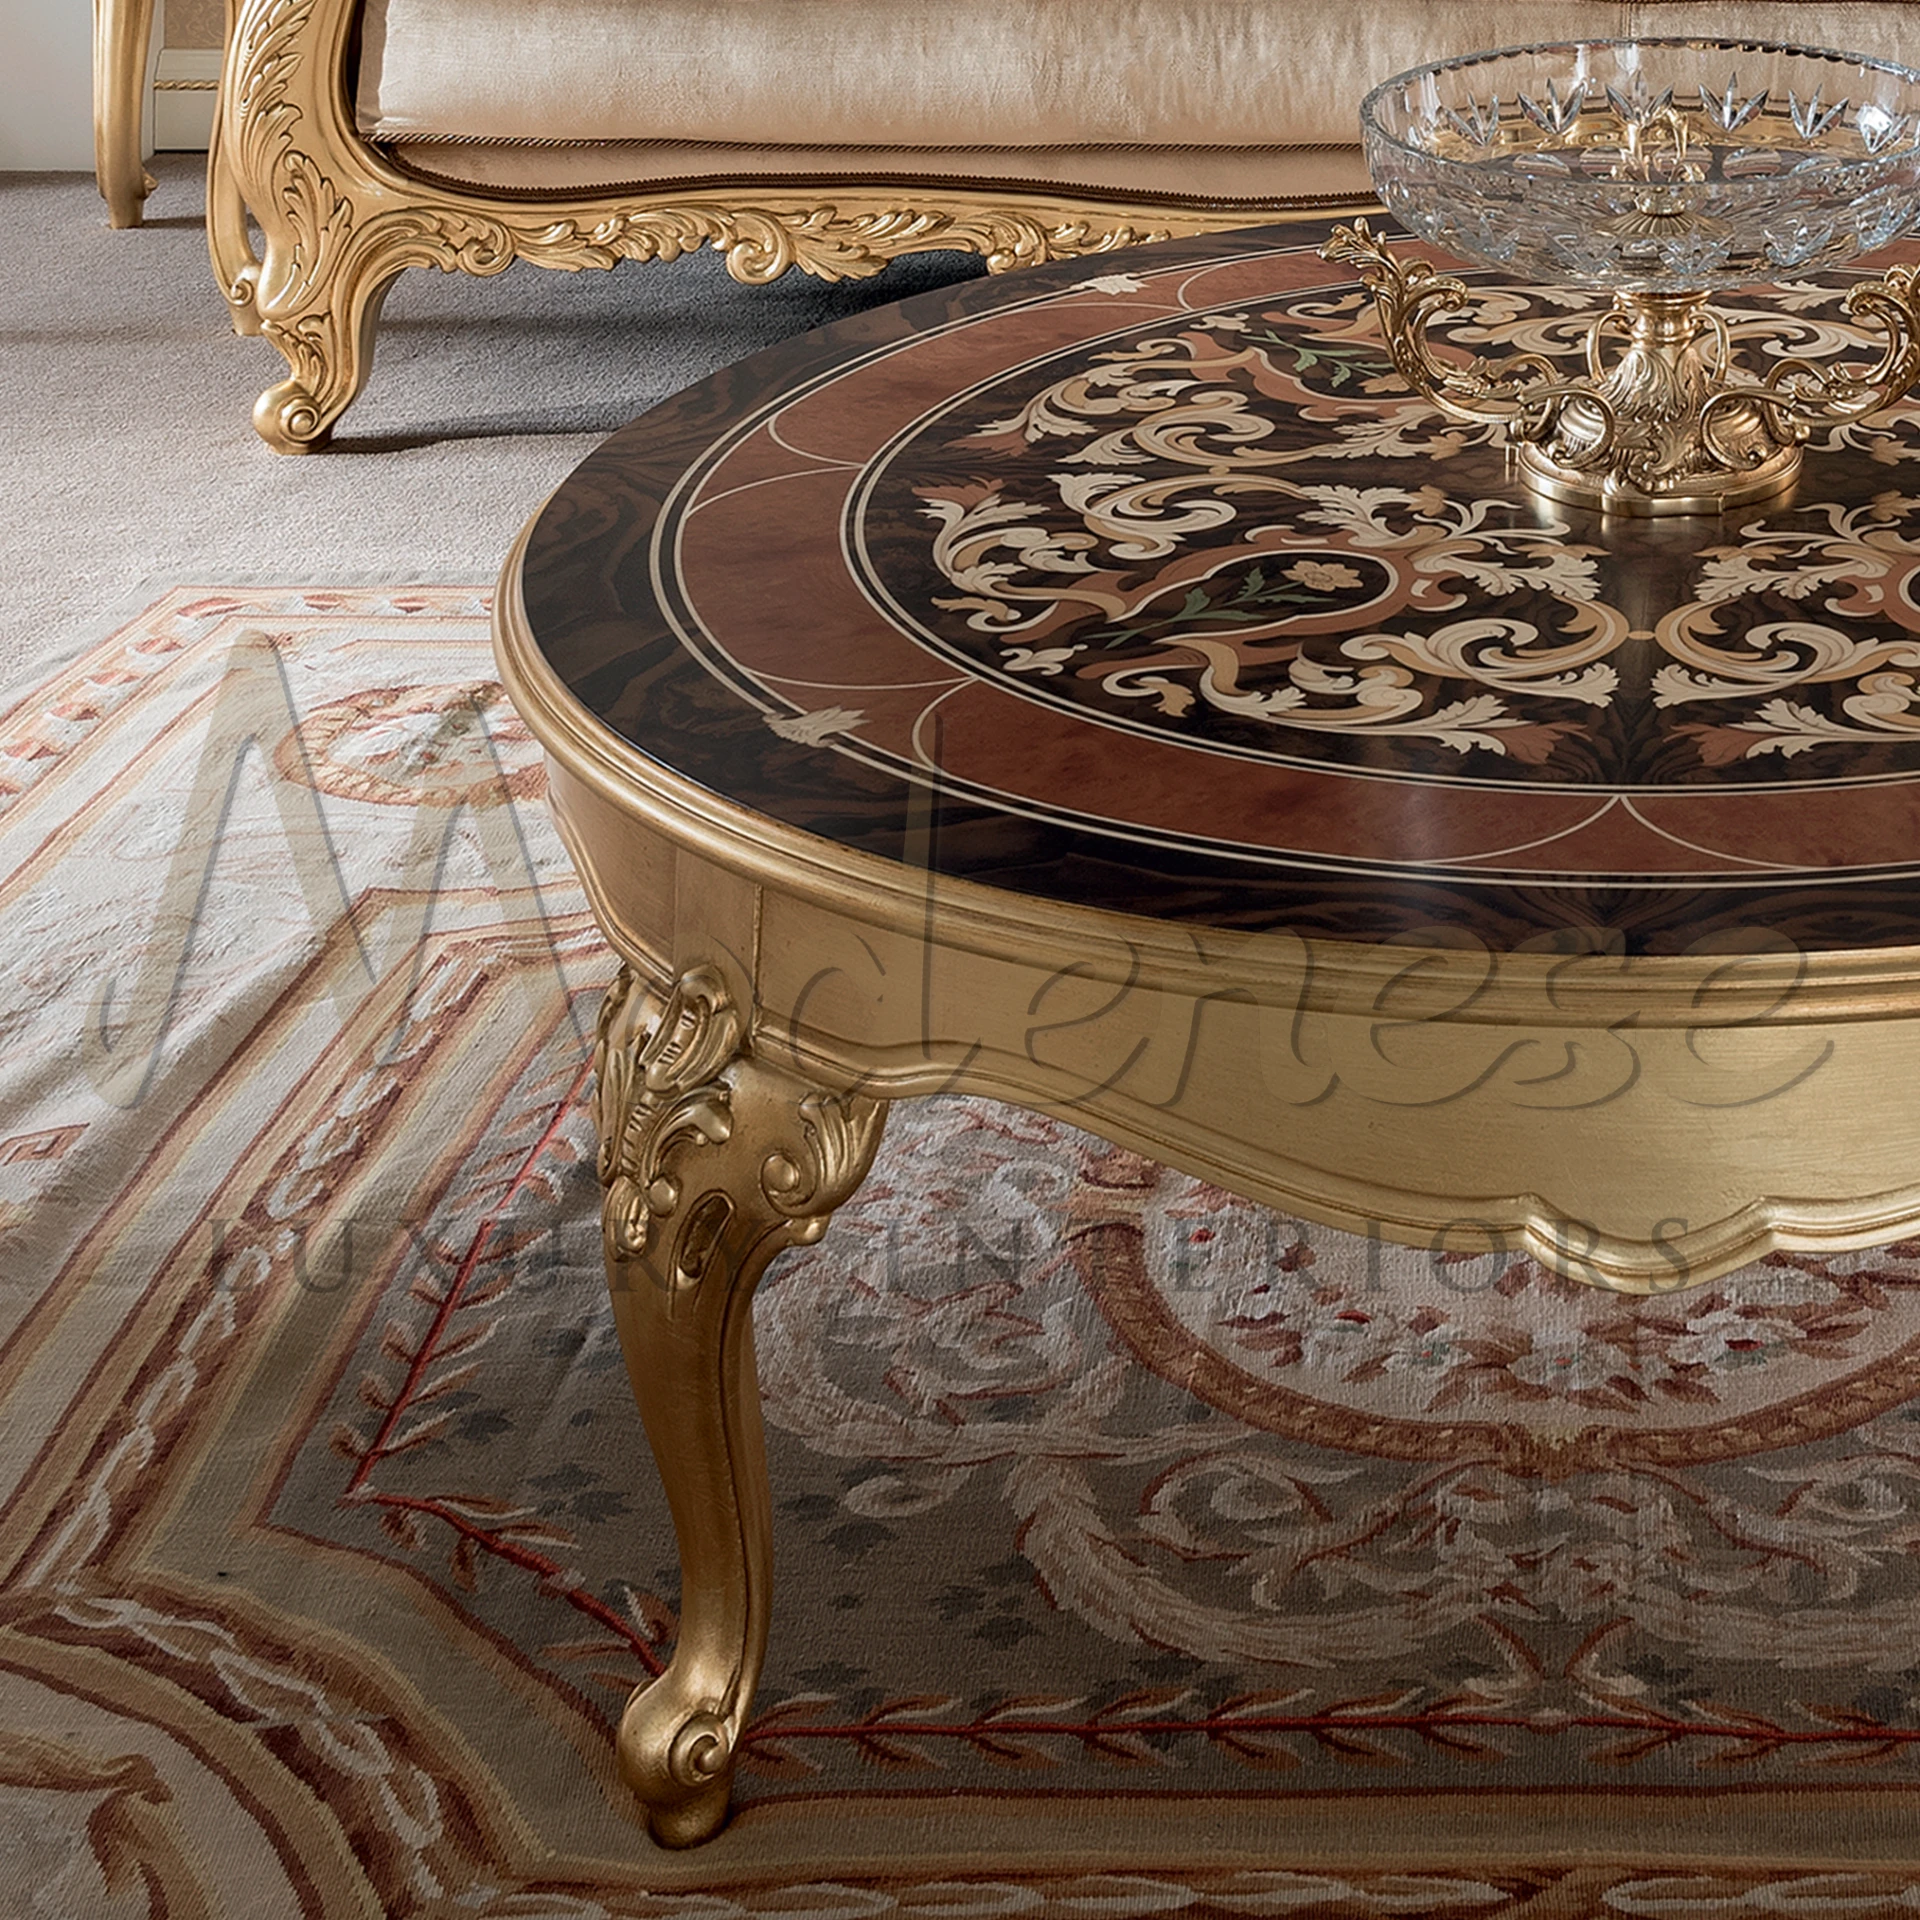 Luxury wood side table, ideal for upscale interior designs